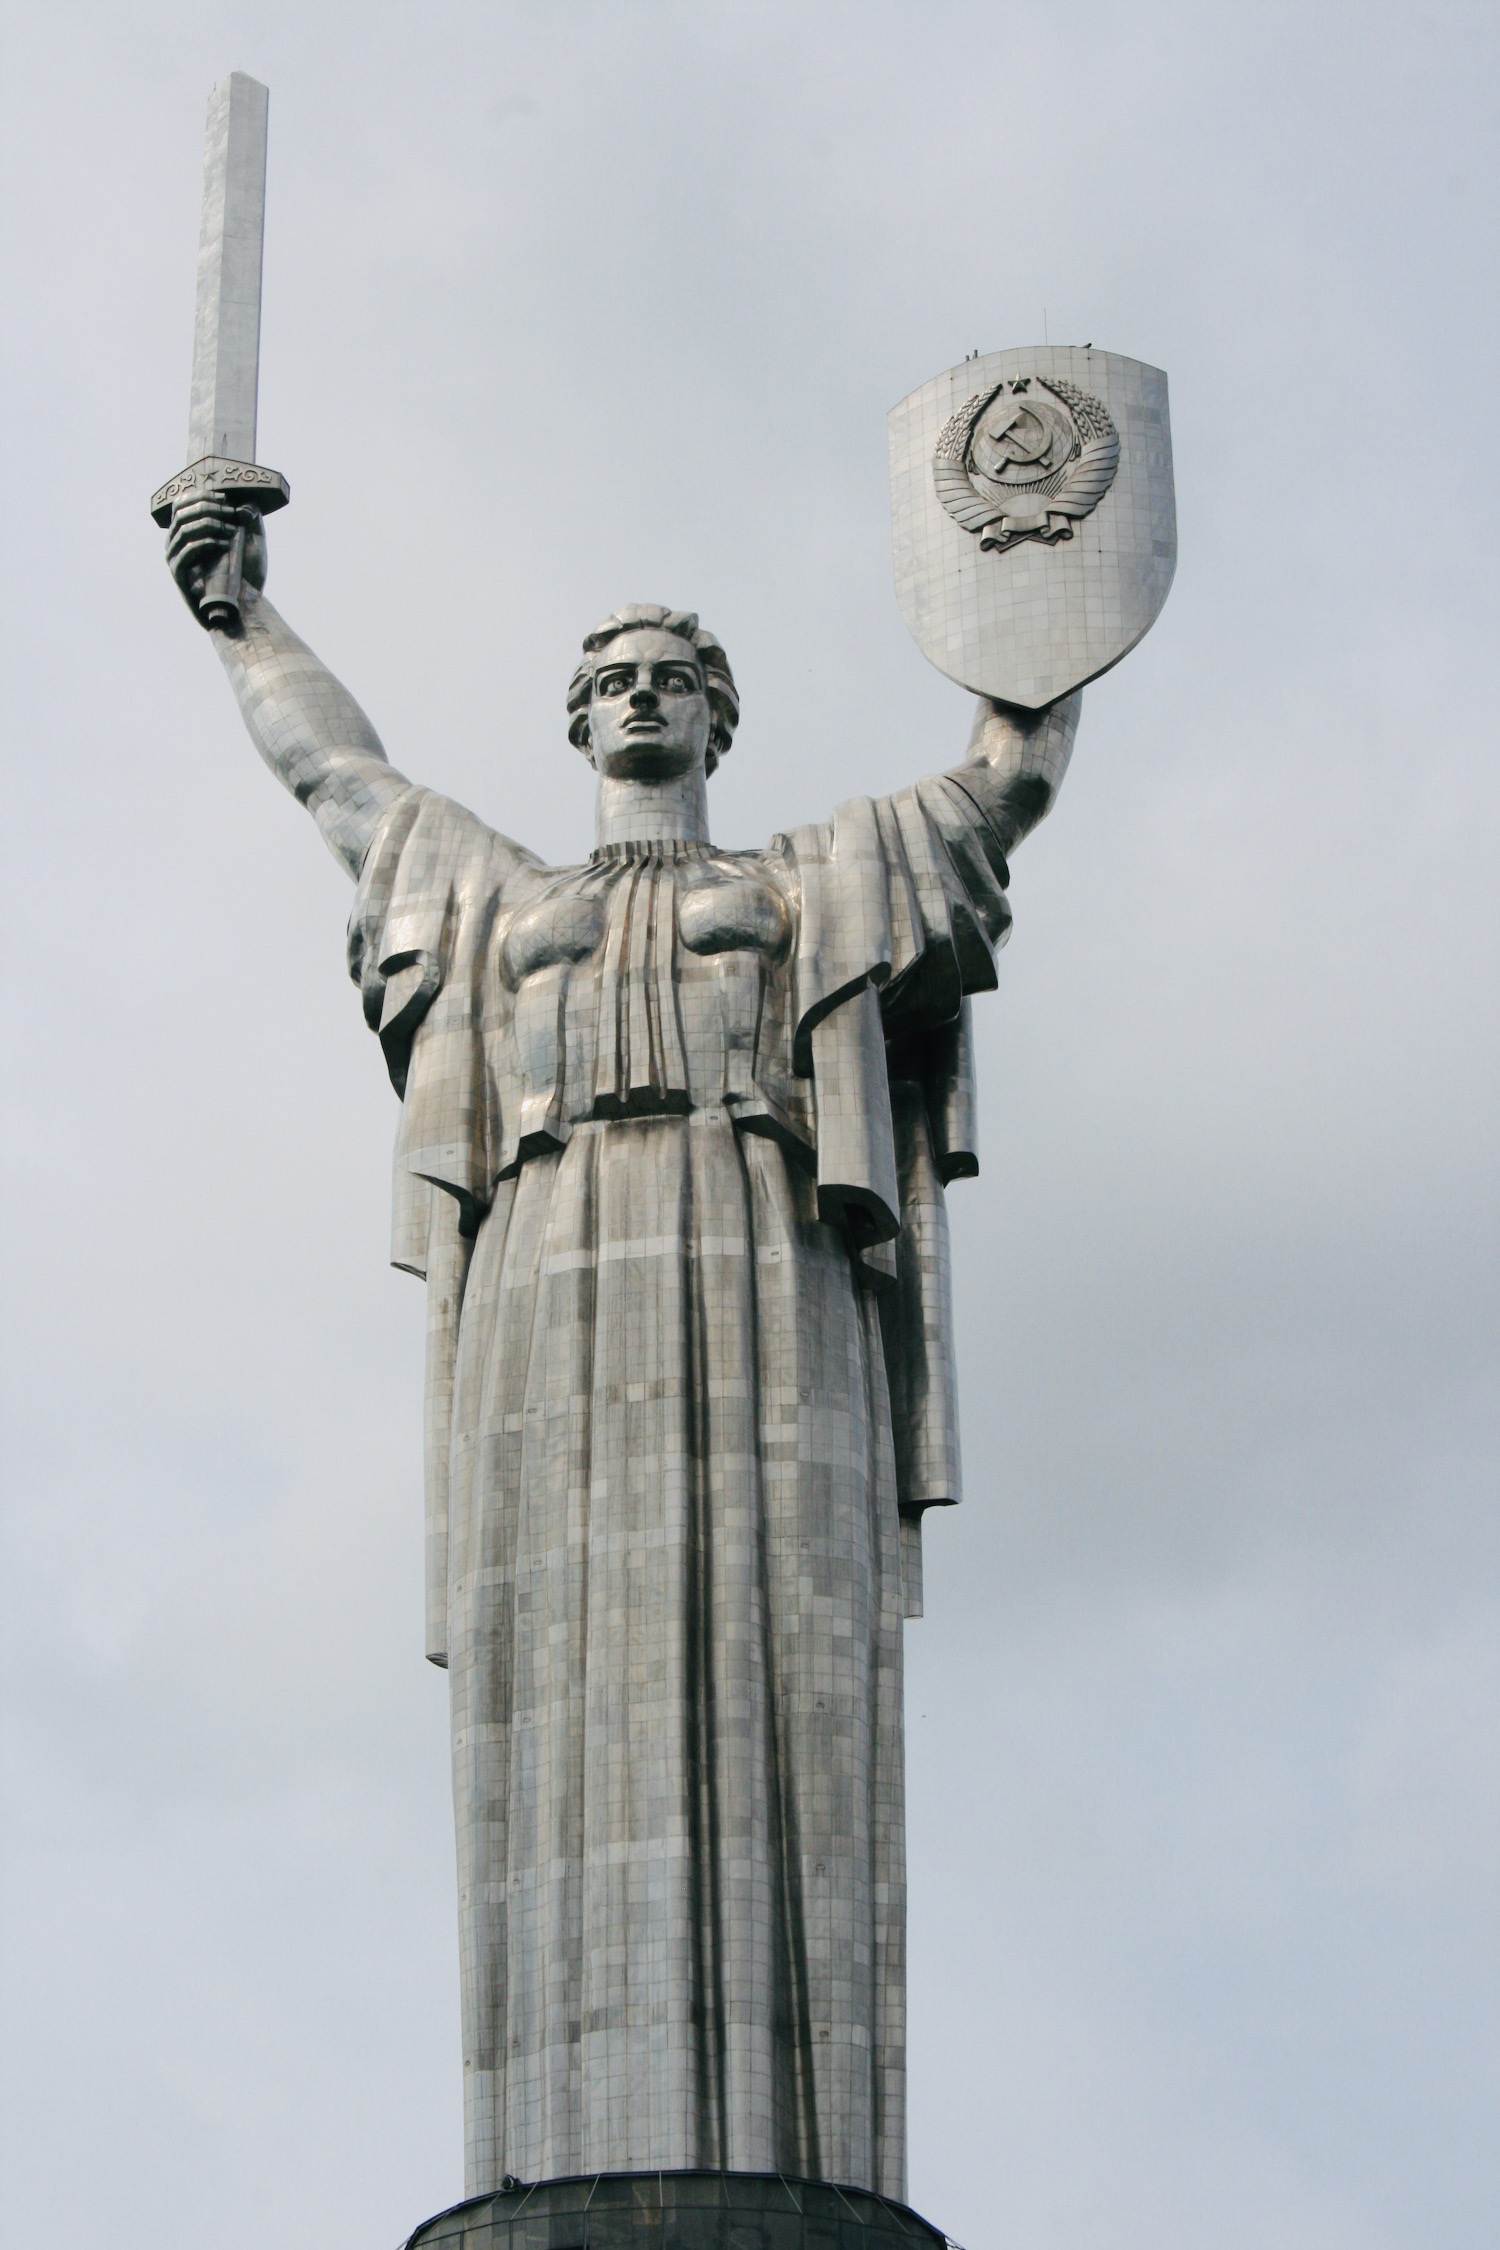 a statue of a woman holding a sword and shield